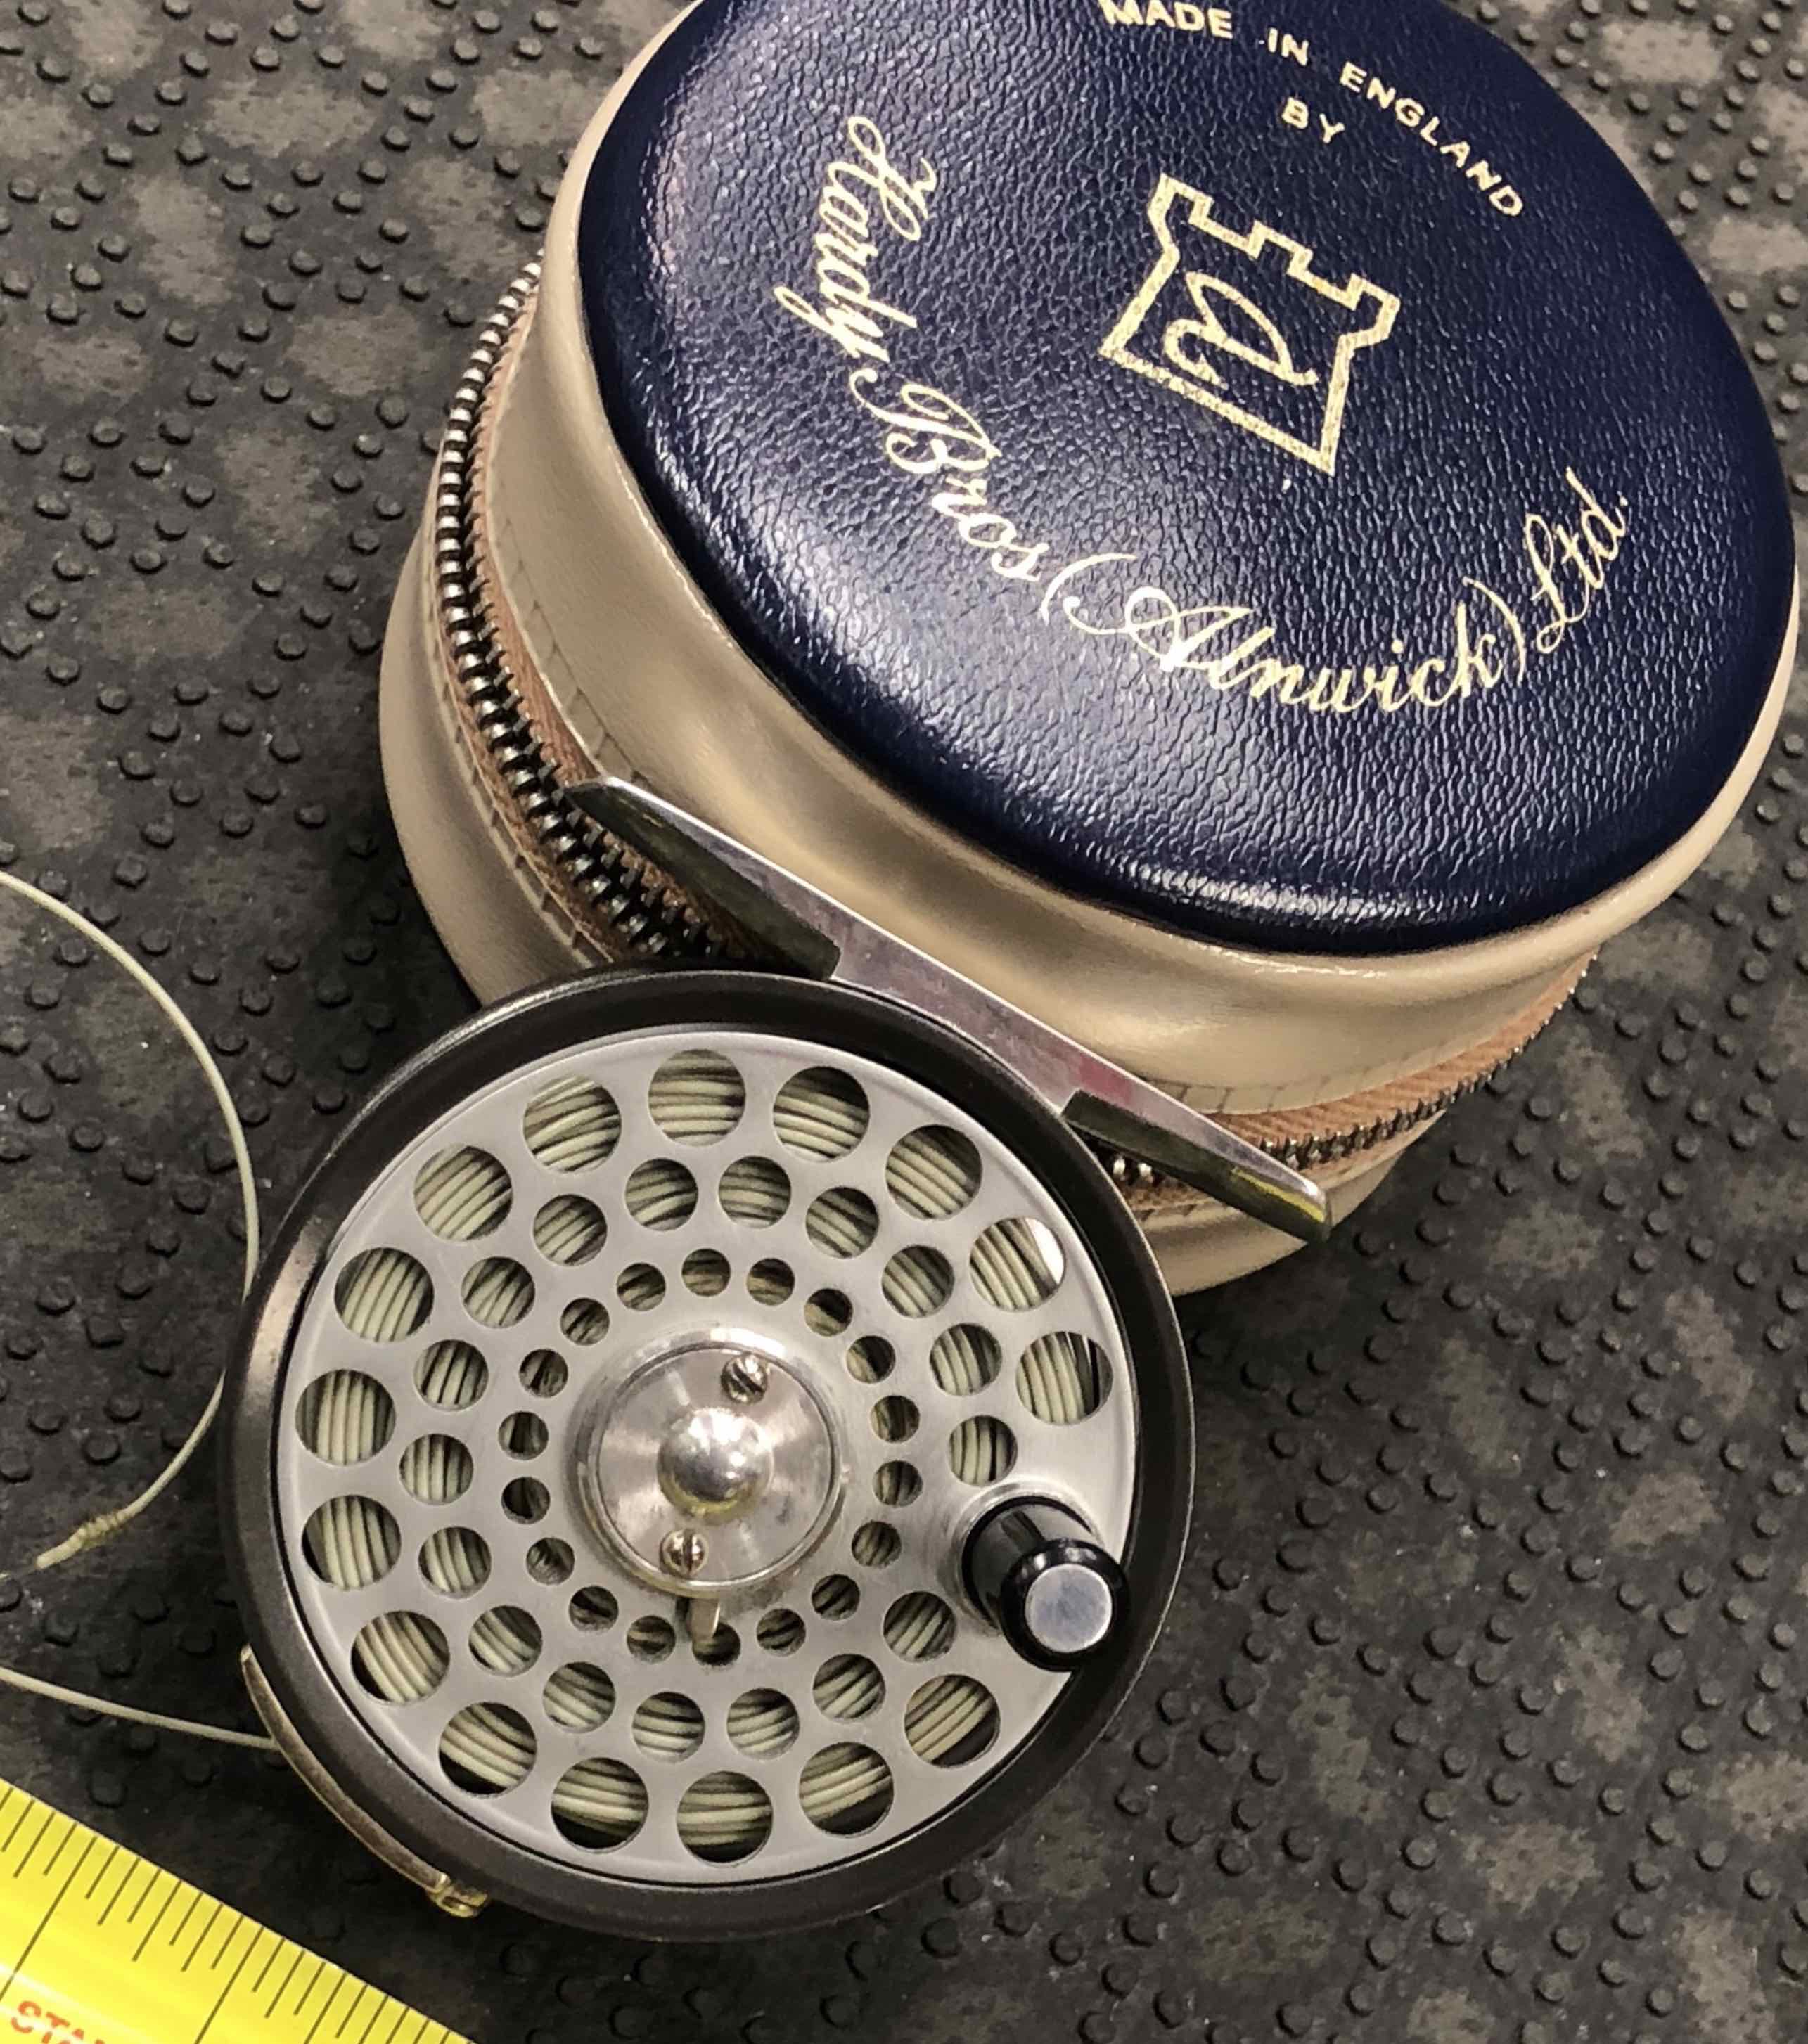 Hardy Fly Reel - Made in England - Classic Lightweight Series - "The Flyweight” c/w zippered Vinyl Case & DT2F - EXCELLENT CONDITION! - $175